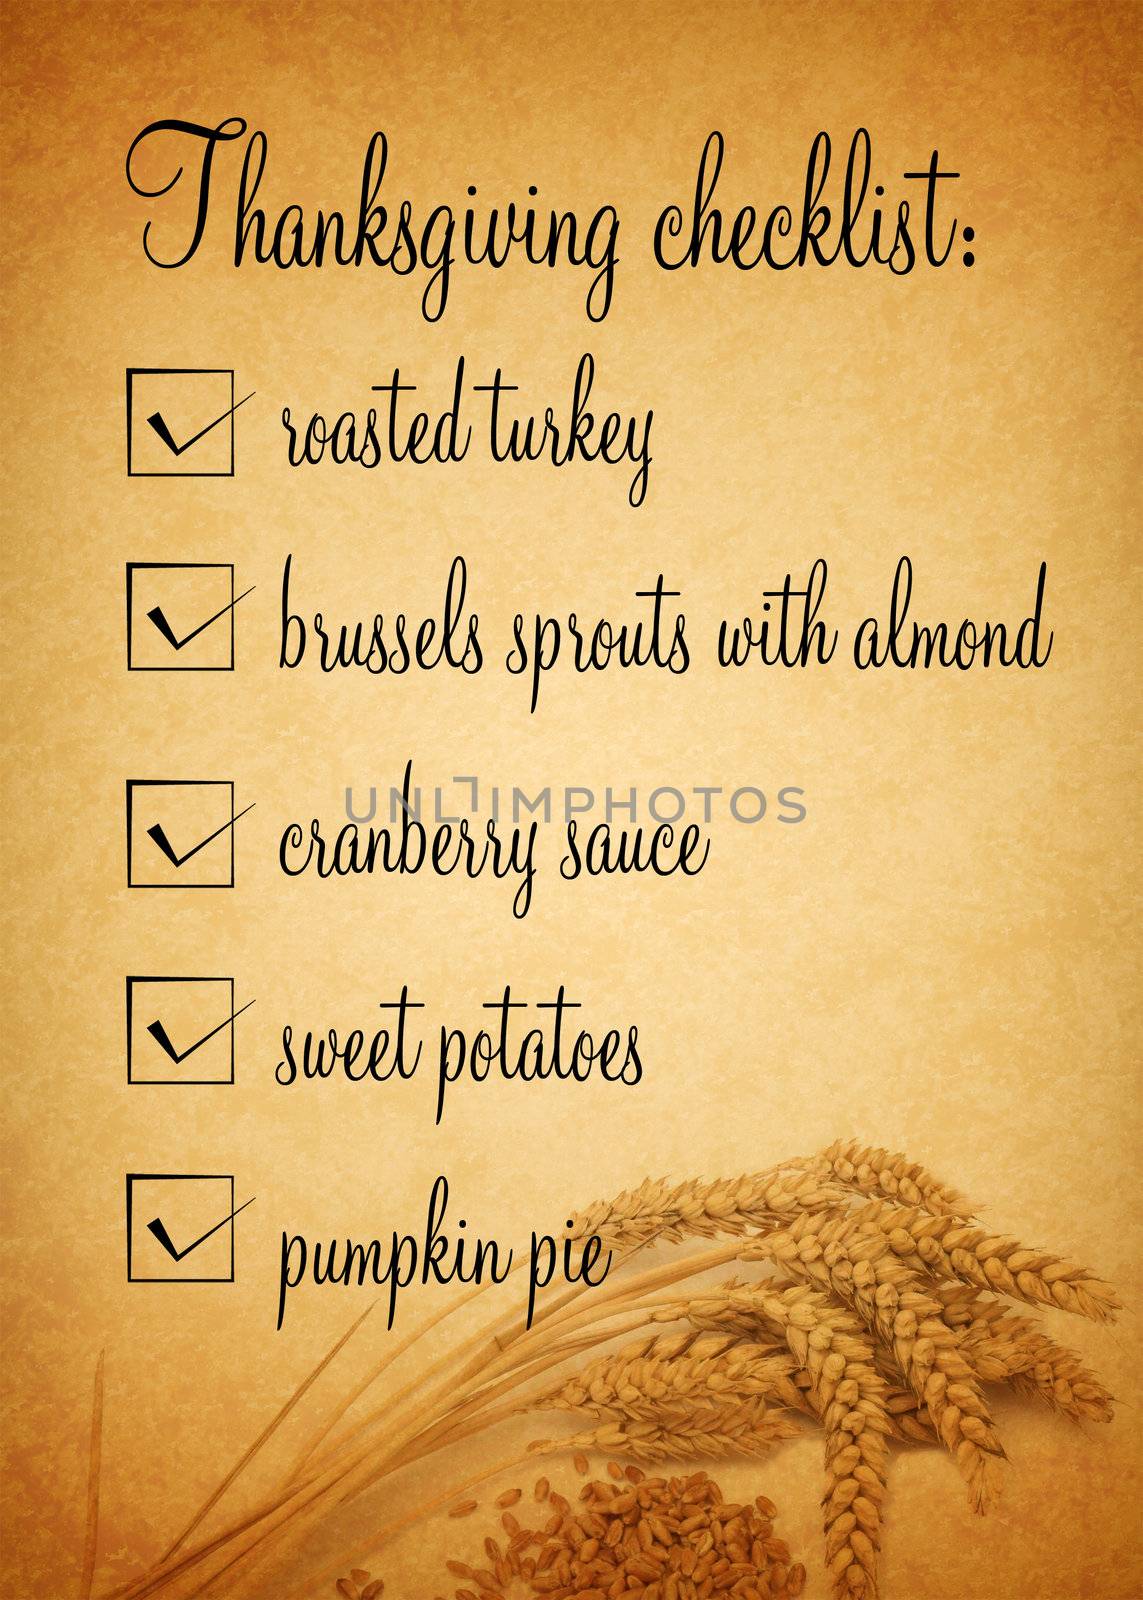 Thanksgiving checklist illustration with wheat on a brown coloured background.